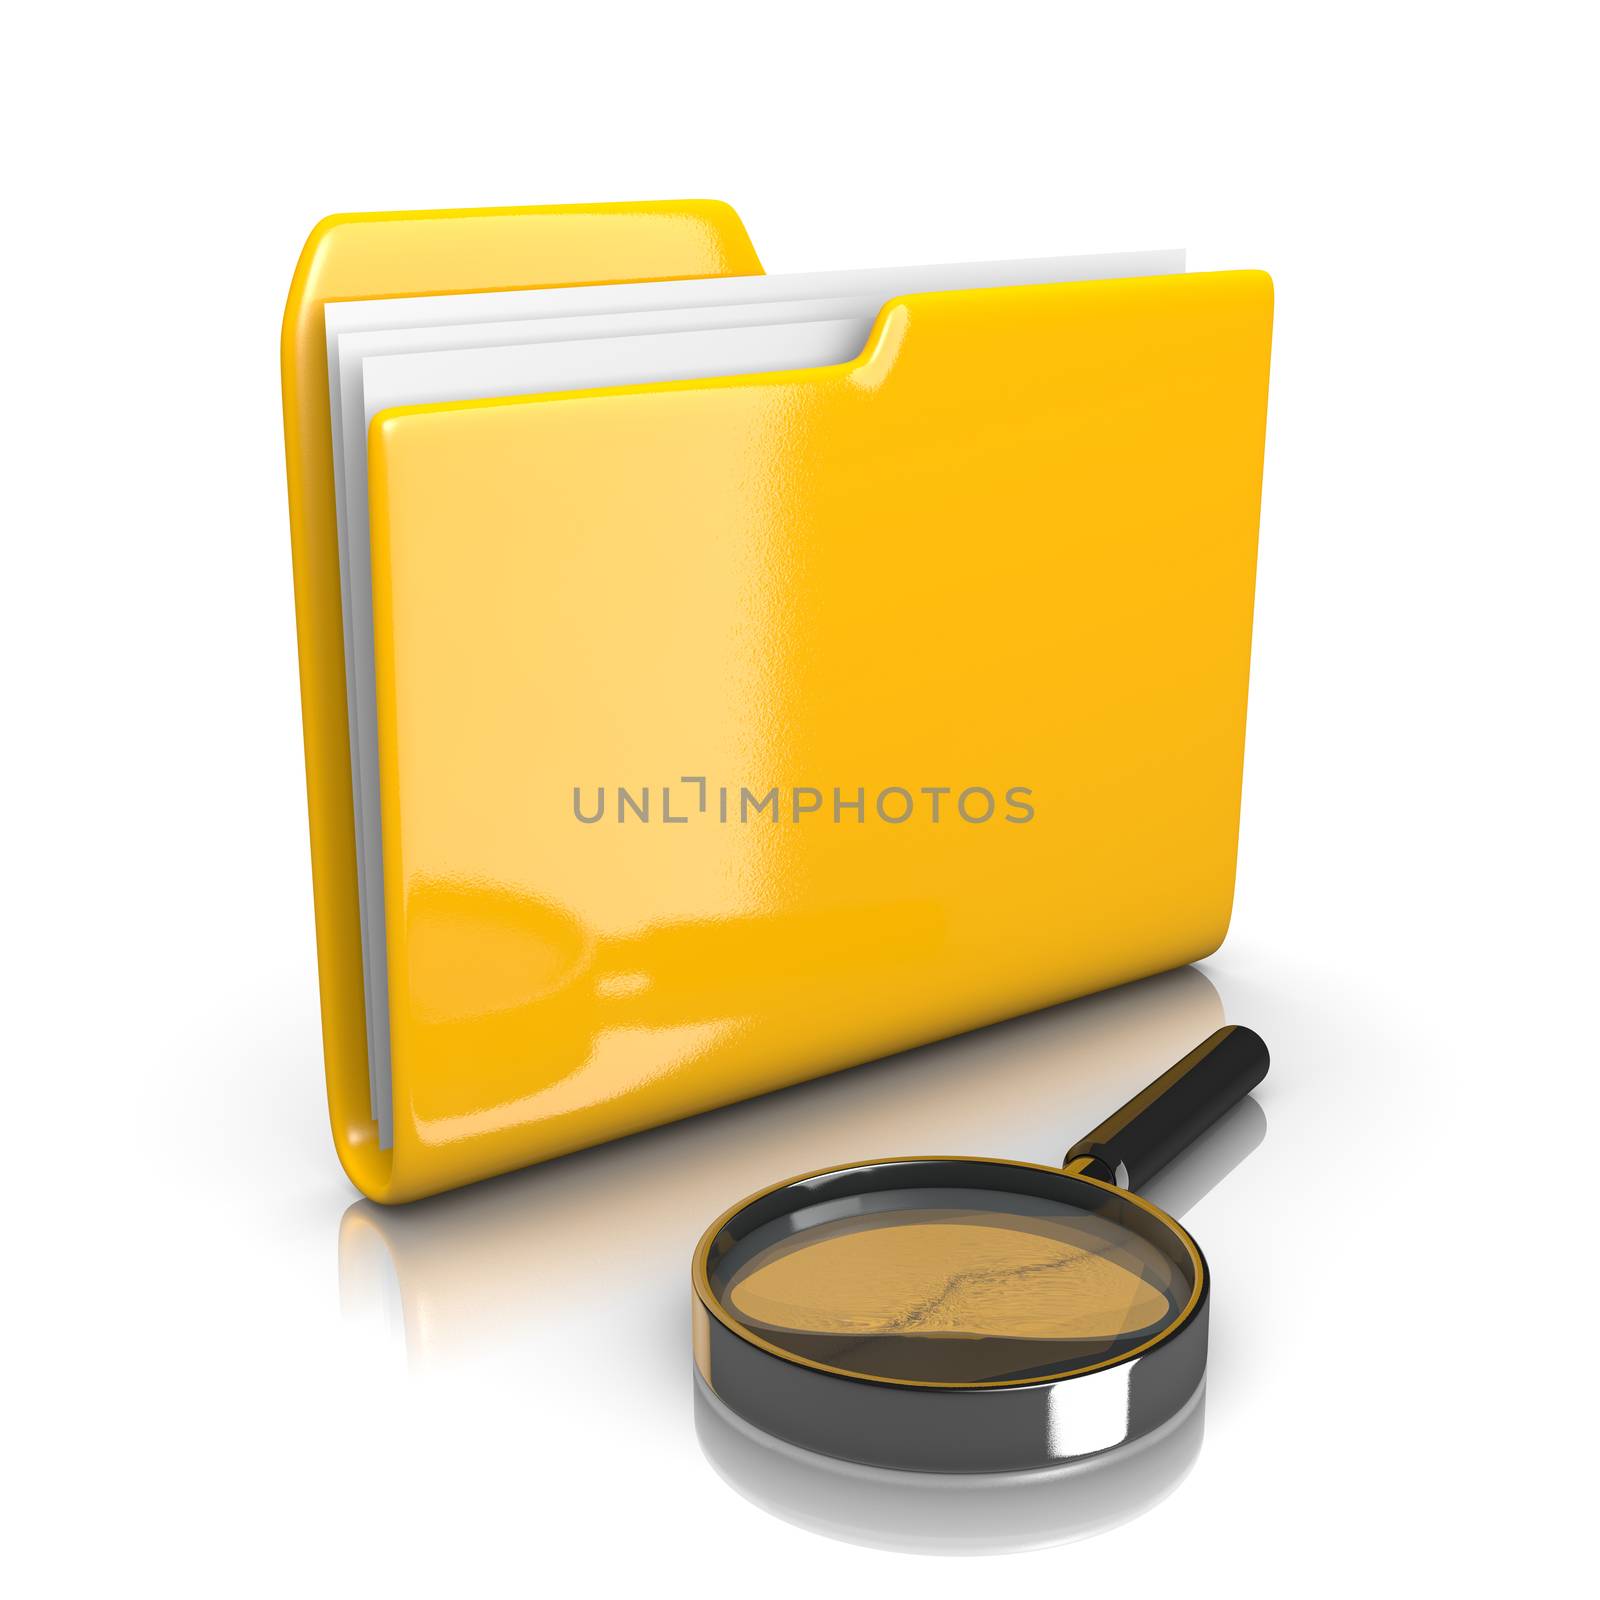 Single Yellow Document Folder with Magnifier on White Background 3D Illustration, Search Documents Concept